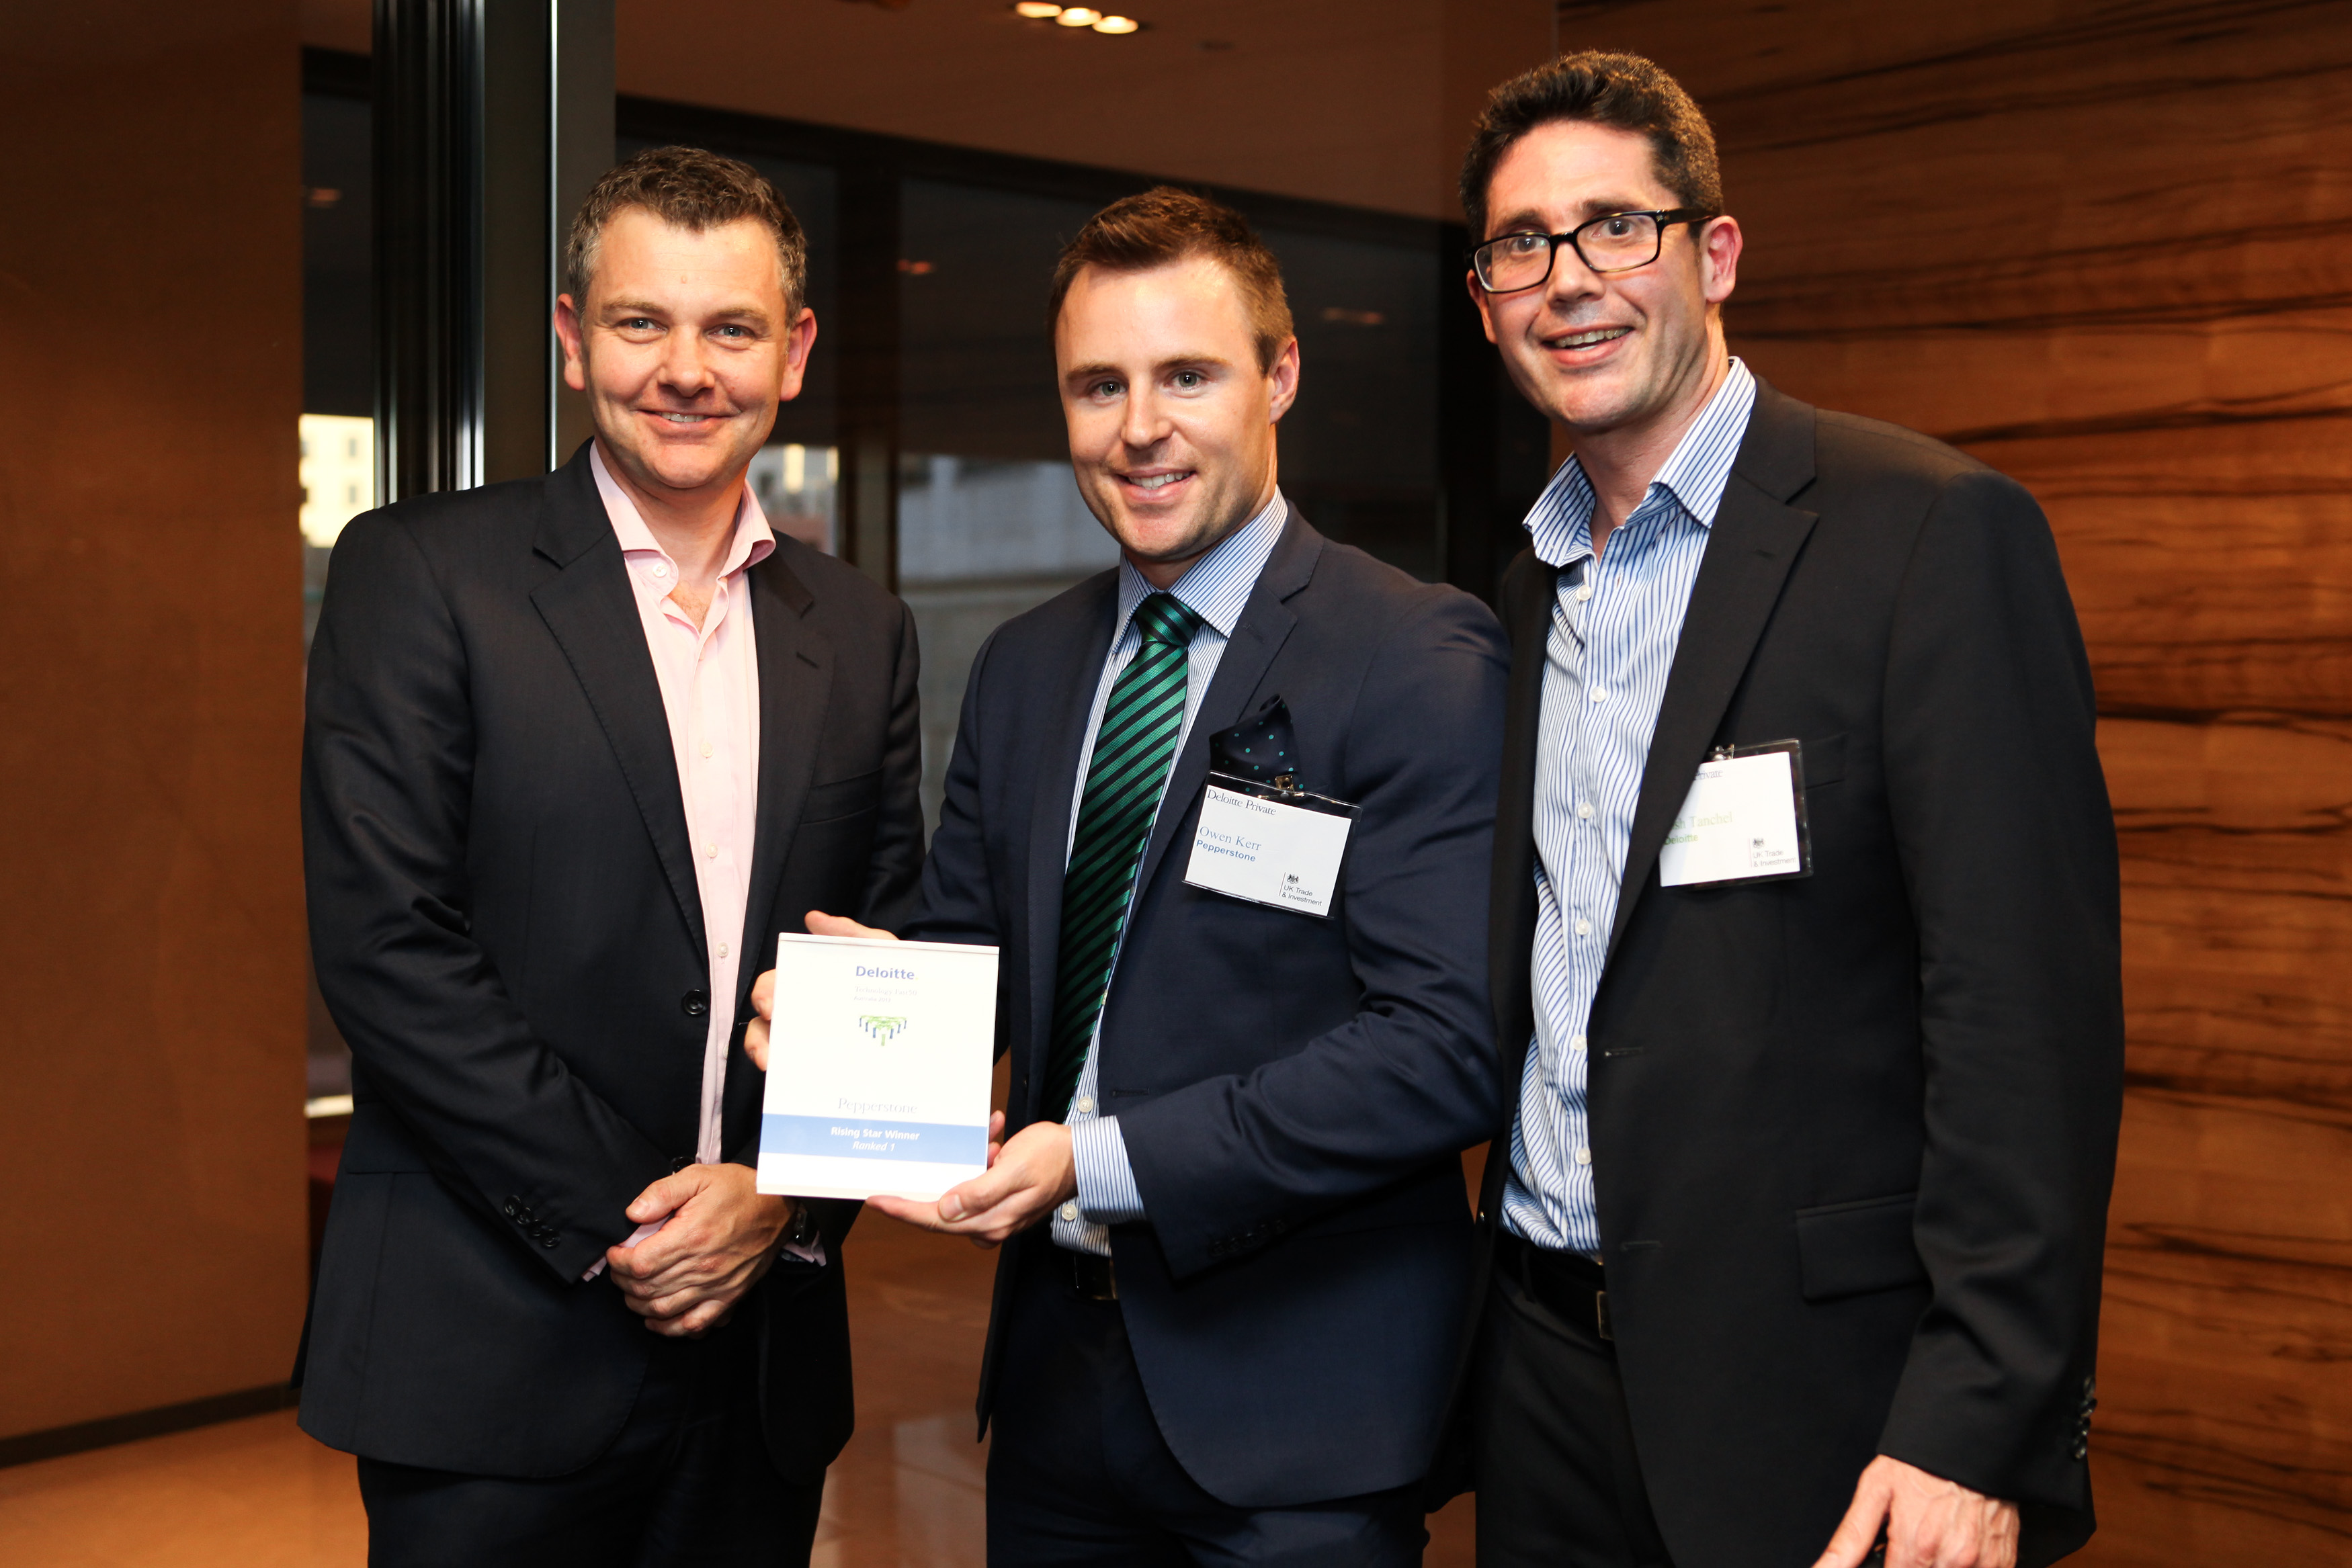 Pepperstone CEO Owen Kerr collecting the Fast 50 Award